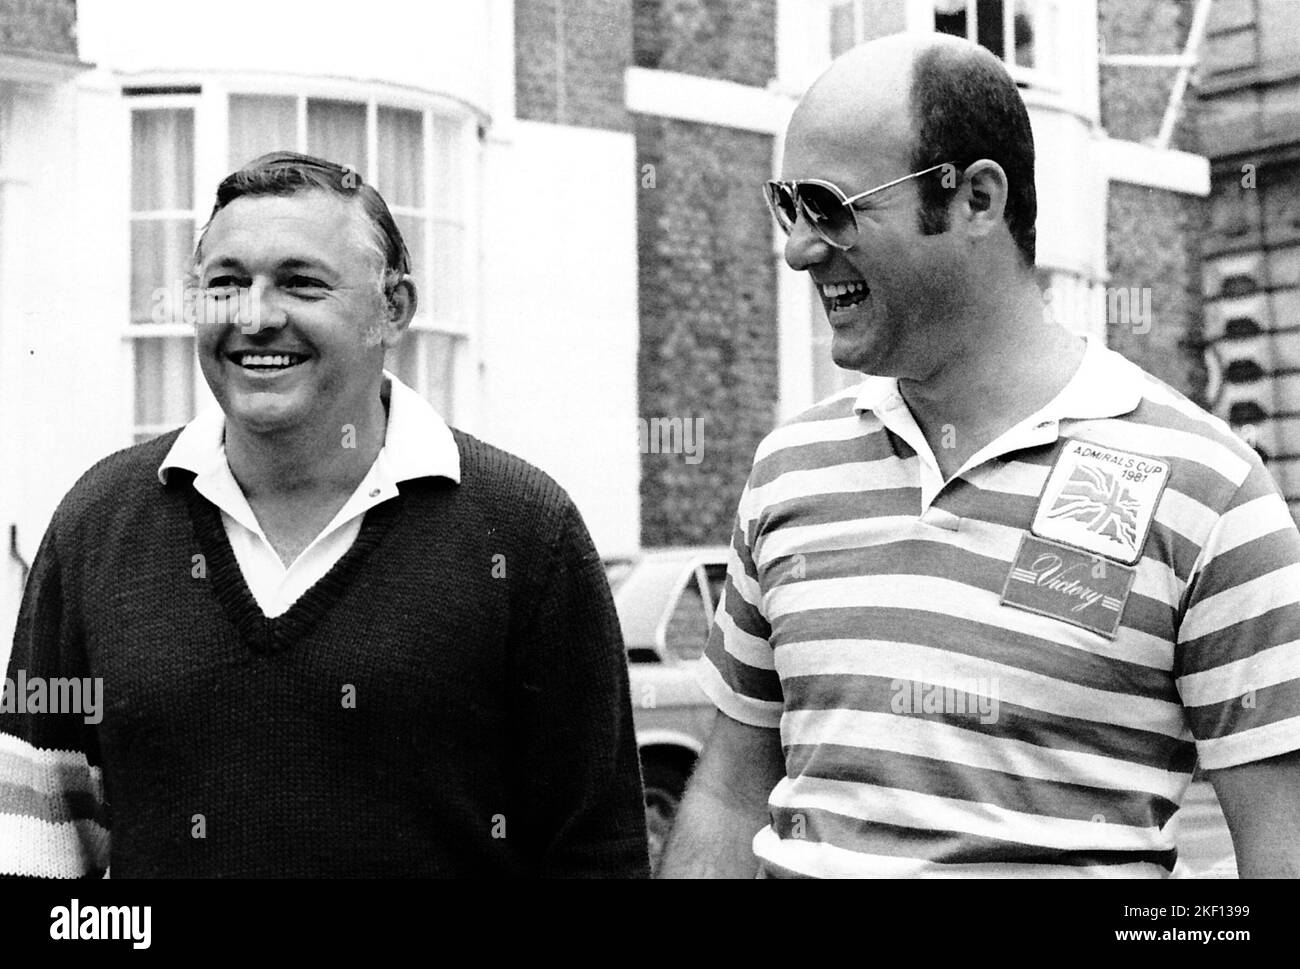 AJAXNETPHOTO. AUGUST, 1981. COWES, ENGLAND. - KRUGGERRANDS PRIZE - (L-R) - AUSTRALIAN AND BRITISH YACHTSMEN ALAN BOND AND PETER DE SAVARY SHARE A JOKE WHILE ANNOUNCING THEIR PROPOSED PRIVATE MATCH RACE DURING THE ADMIRAL'S CUP SERIES, FOR THE PRIZE OF GOLD KRUGGERRANDS.PHOTO:COLIN JARMAN/AJAX REF:220605 87 Stock Photo